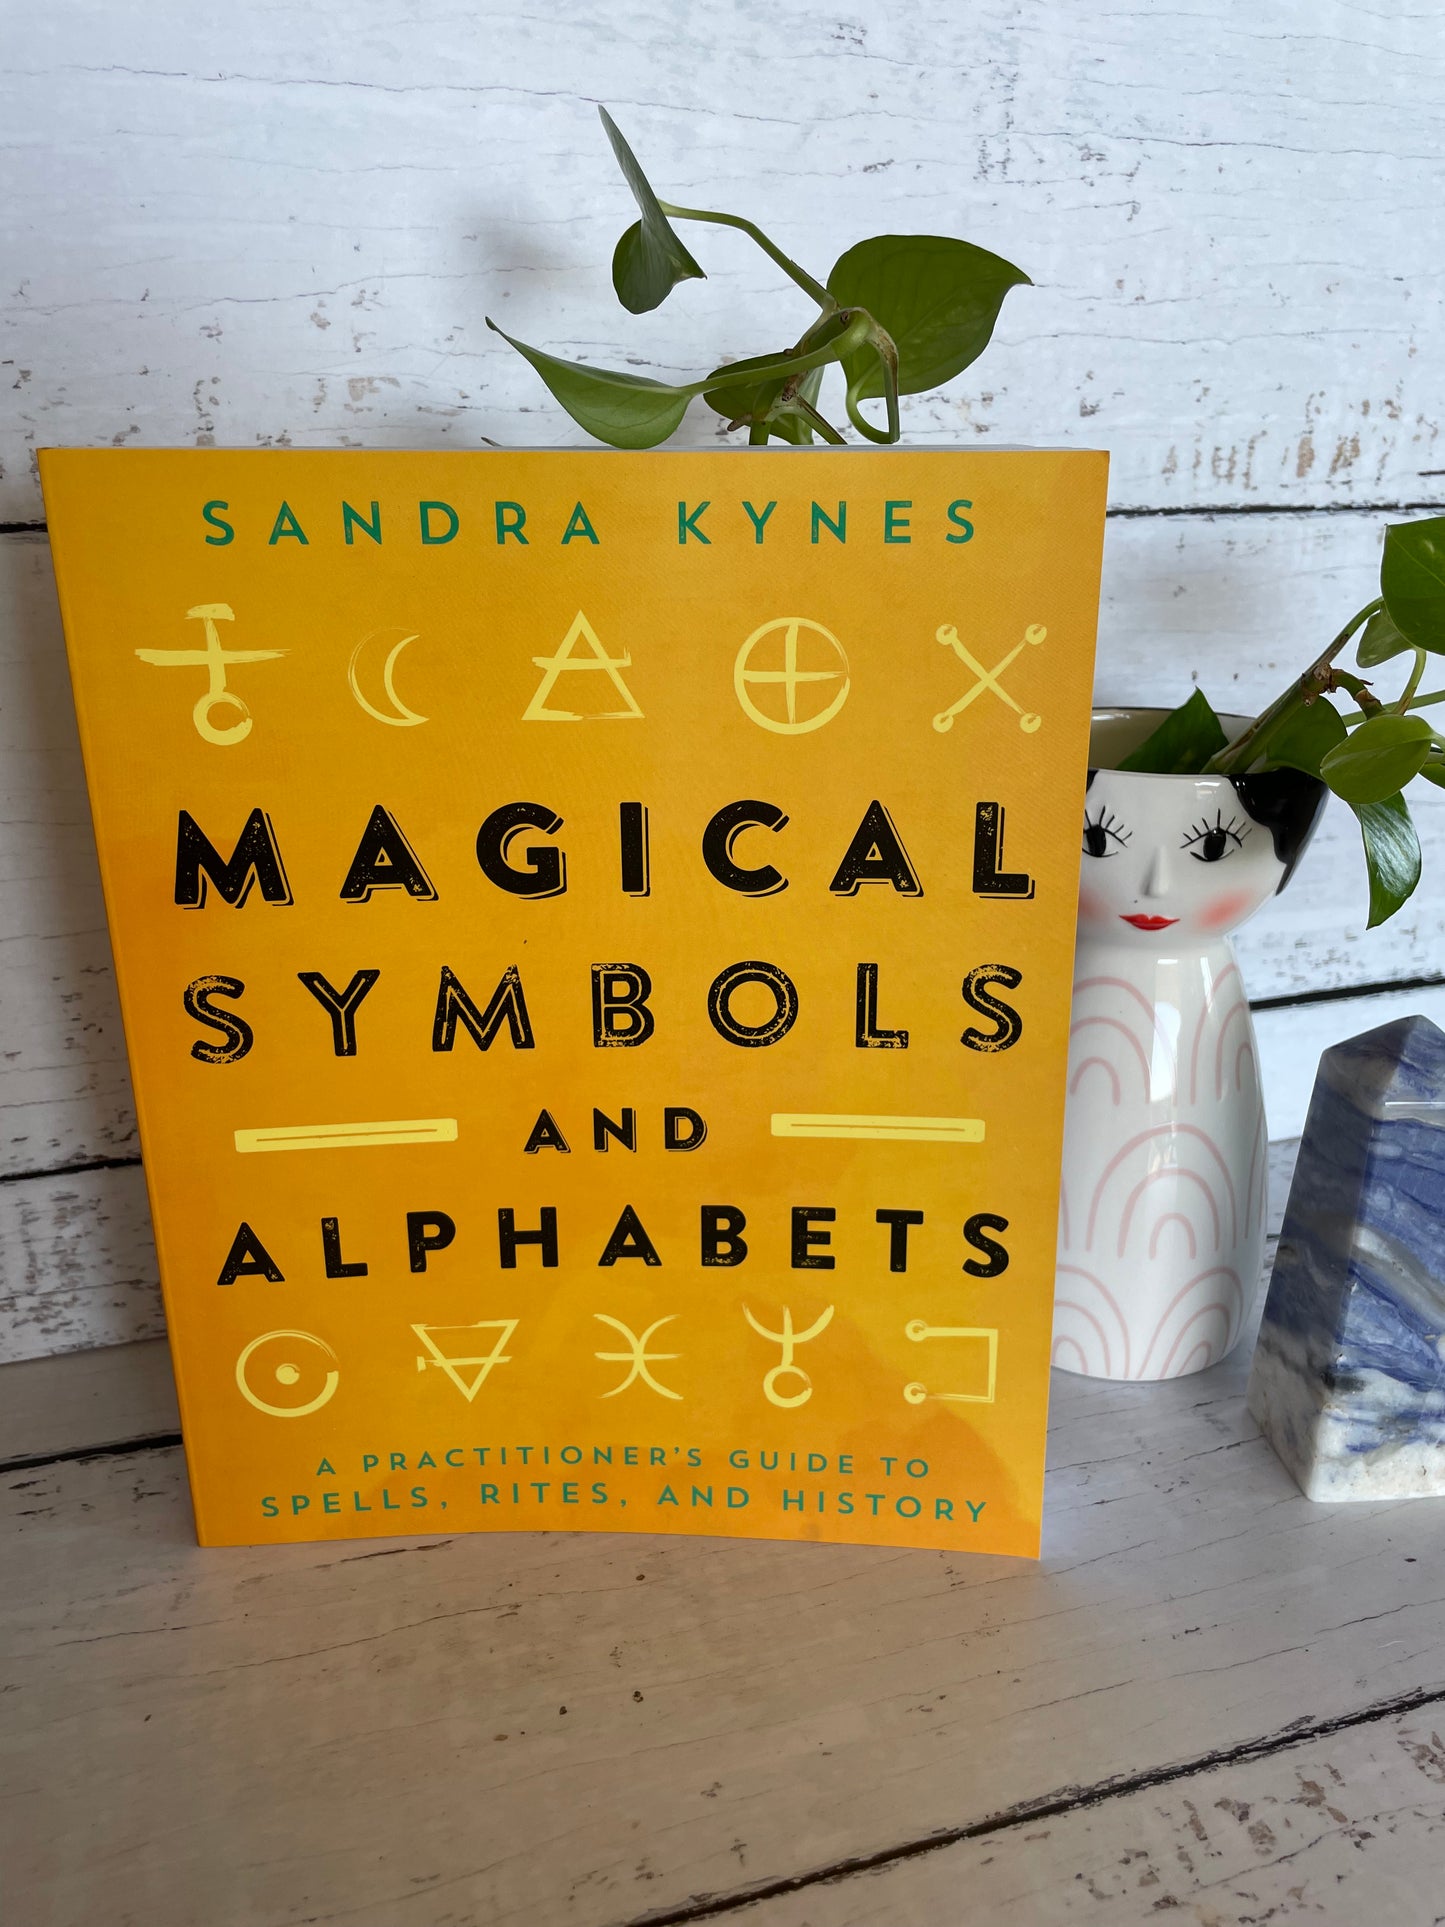 Magical Symbols and Alphabets: A Practitioner's Guide to Spells, Rites, and History